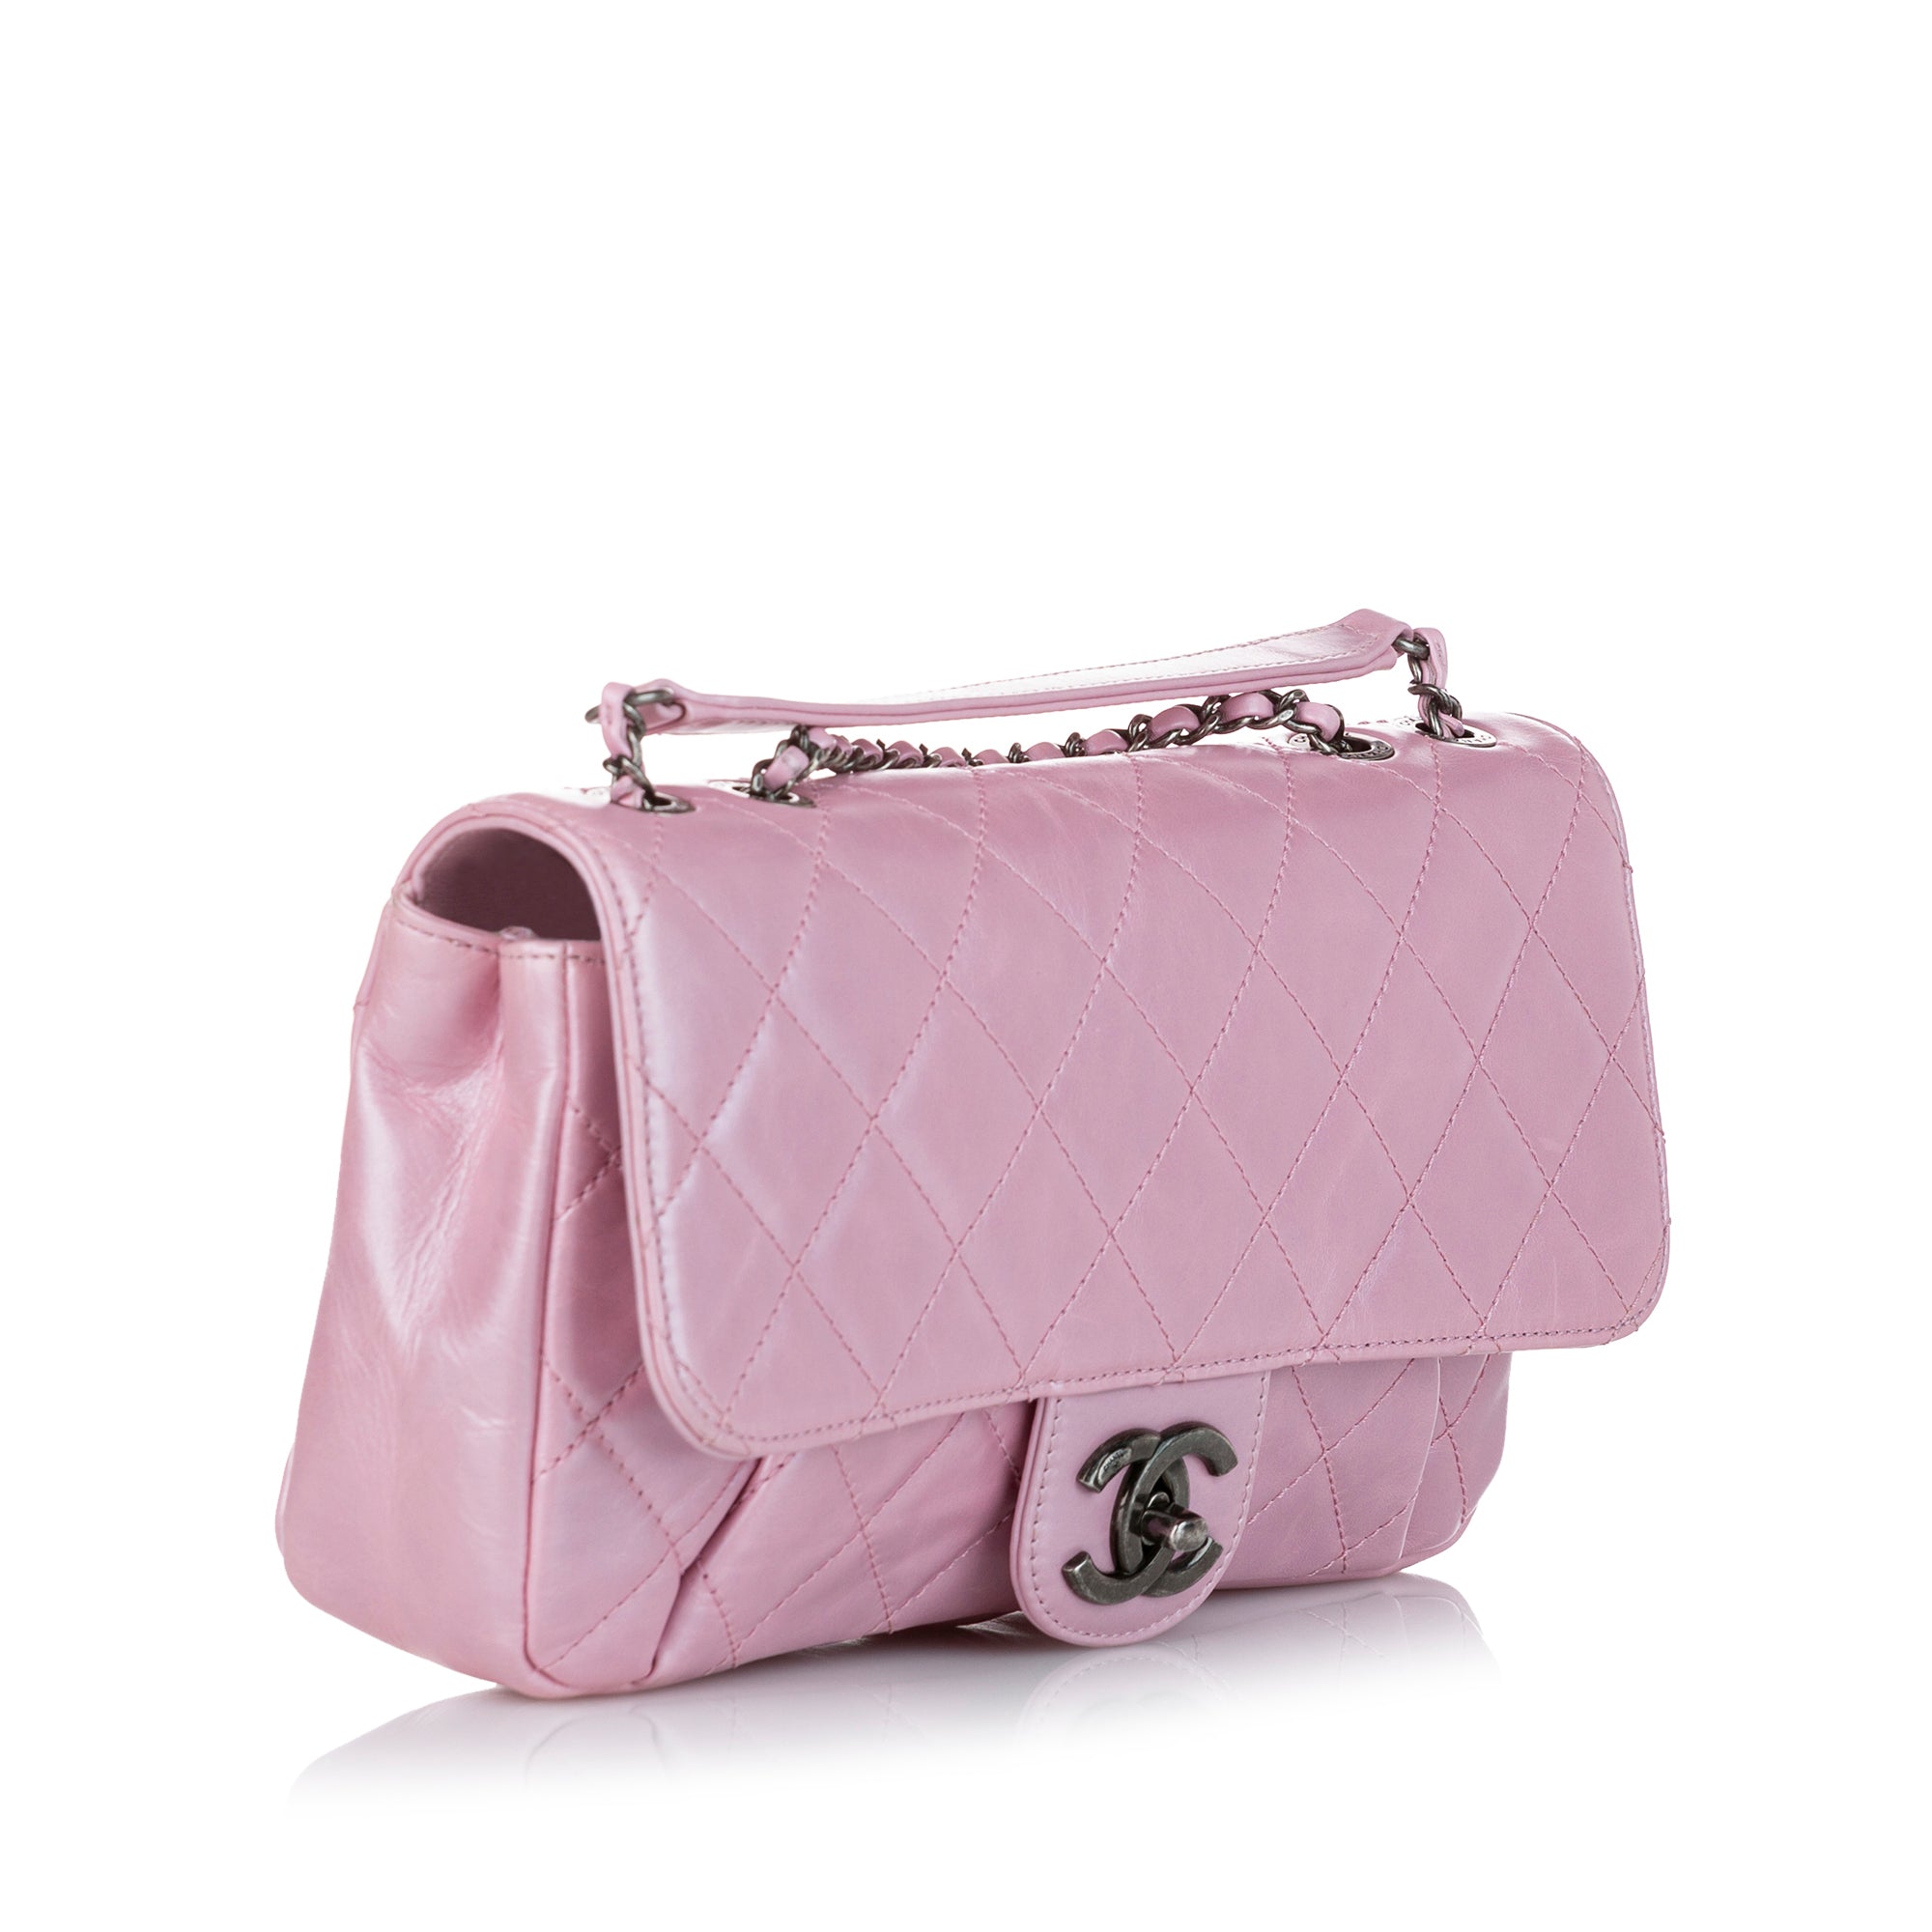 Chanel Pink Quilted Leather Medium Classic Double Flap Bag